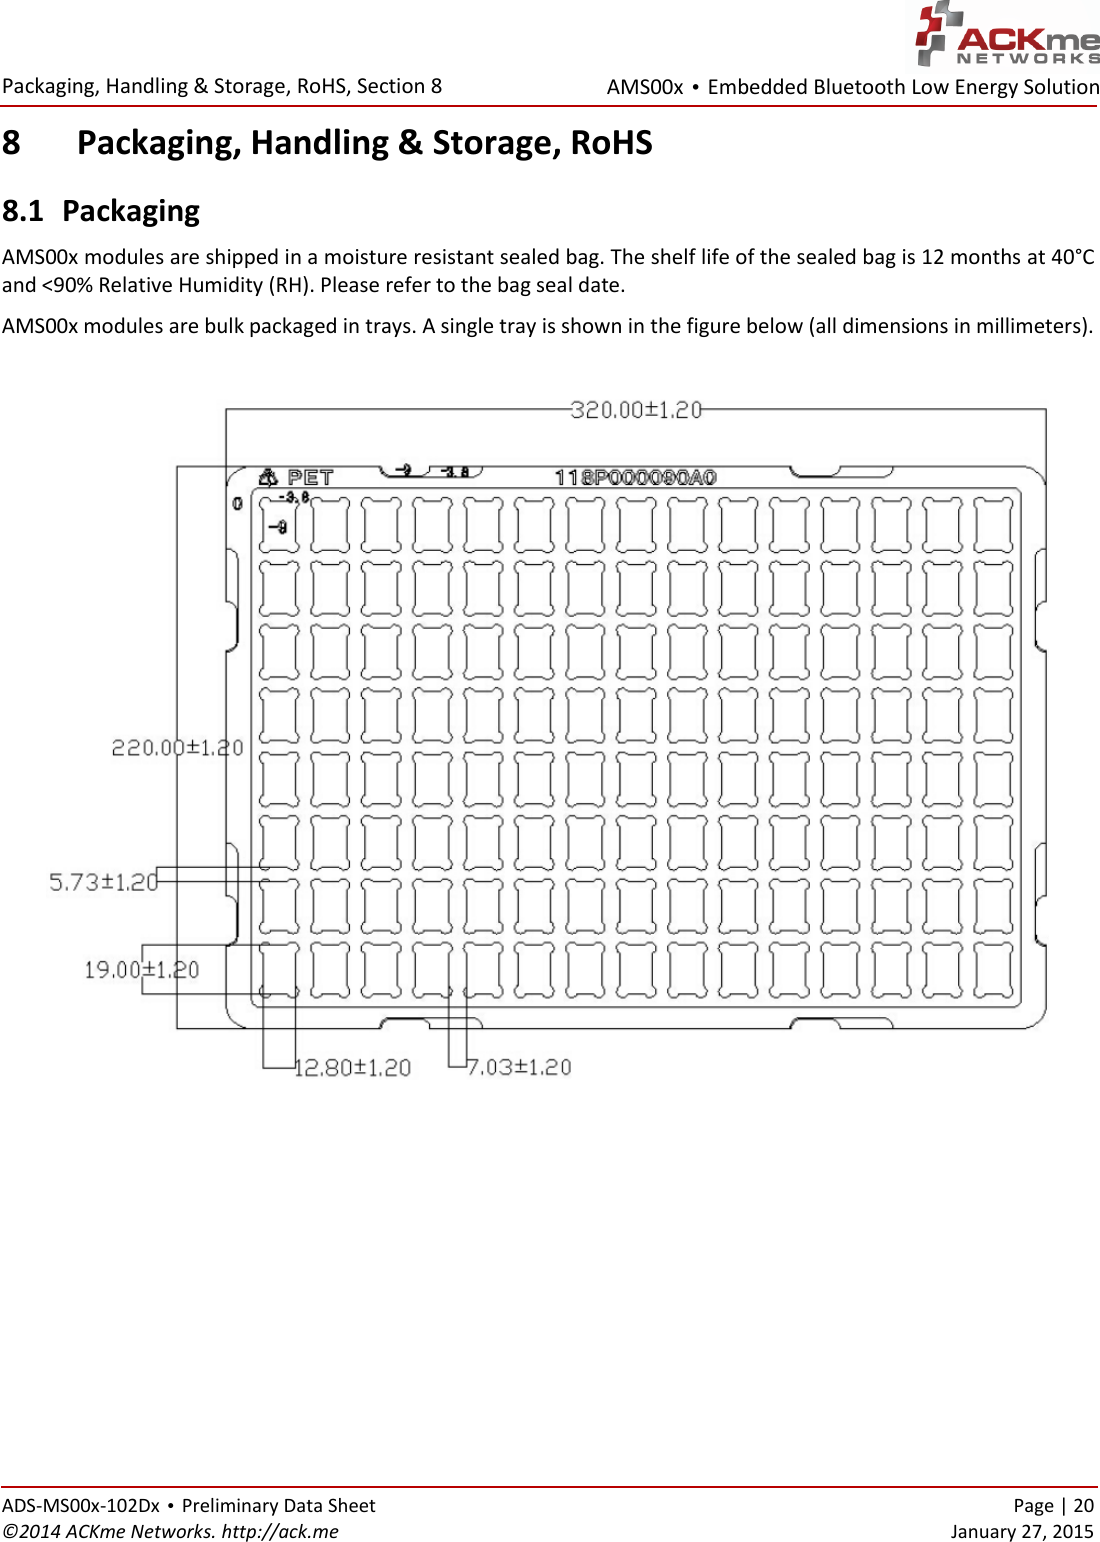 AMS00x • Embedded Bluetooth Low Energy Solution  Packaging, Handling &amp; Storage, RoHS, Section 8   ADS-MS00x-102Dx • Preliminary Data Sheet    Page | 20 ©2014 ACKme Networks. http://ack.me    January 27, 2015 8 Packaging, Handling &amp; Storage, RoHS 8.1 Packaging AMS00x modules are shipped in a moisture resistant sealed bag. The shelf life of the sealed bag is 12 months at 40°C and &lt;90% Relative Humidity (RH). Please refer to the bag seal date.  AMS00x modules are bulk packaged in trays. A single tray is shown in the figure below (all dimensions in millimeters).      